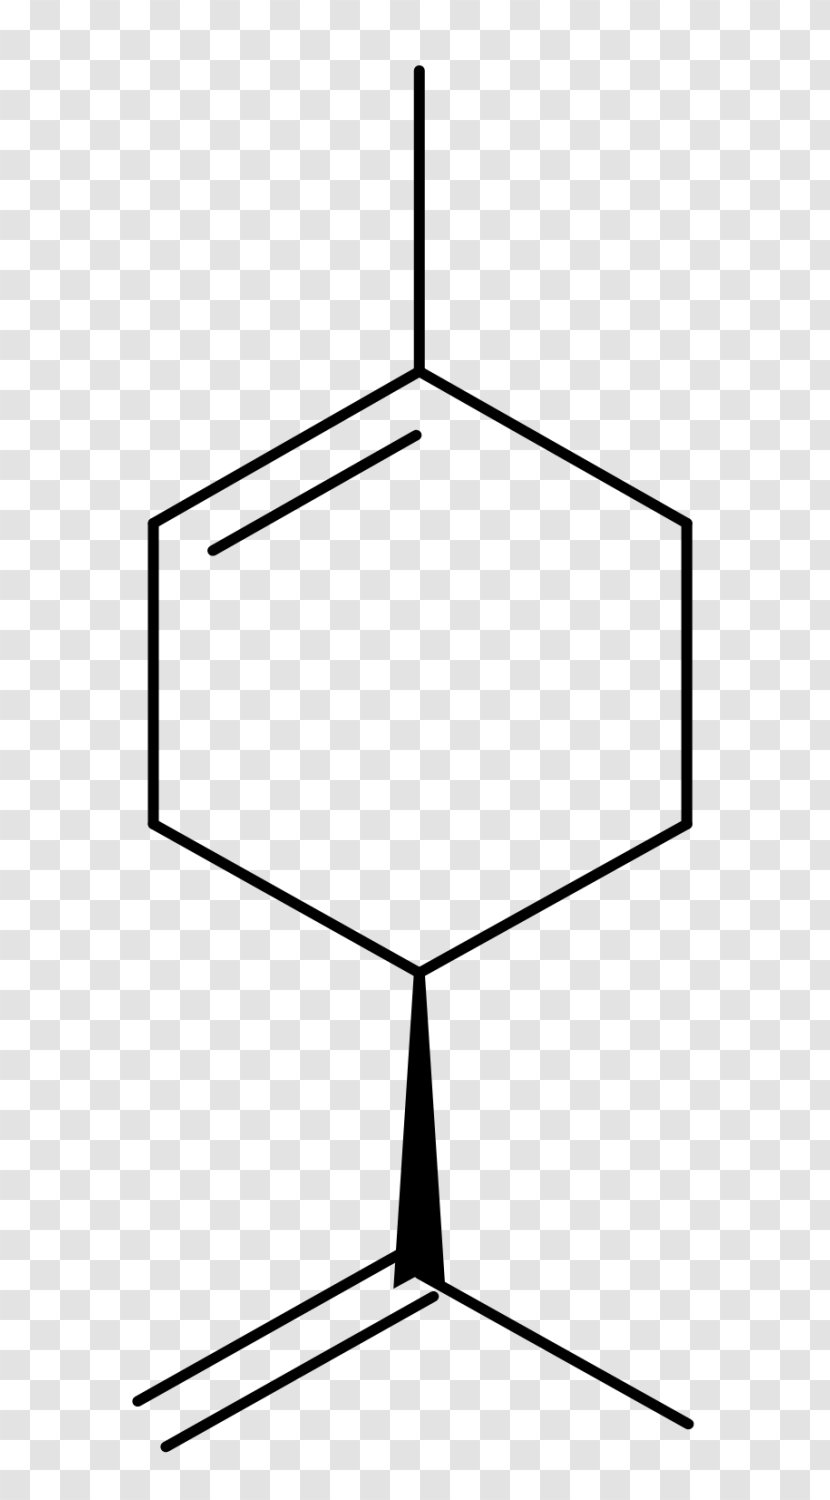 Methyl Group Carvone Benzyl Alcohol Limonene Chirality - Symmetry - Growth Profile Transparent PNG